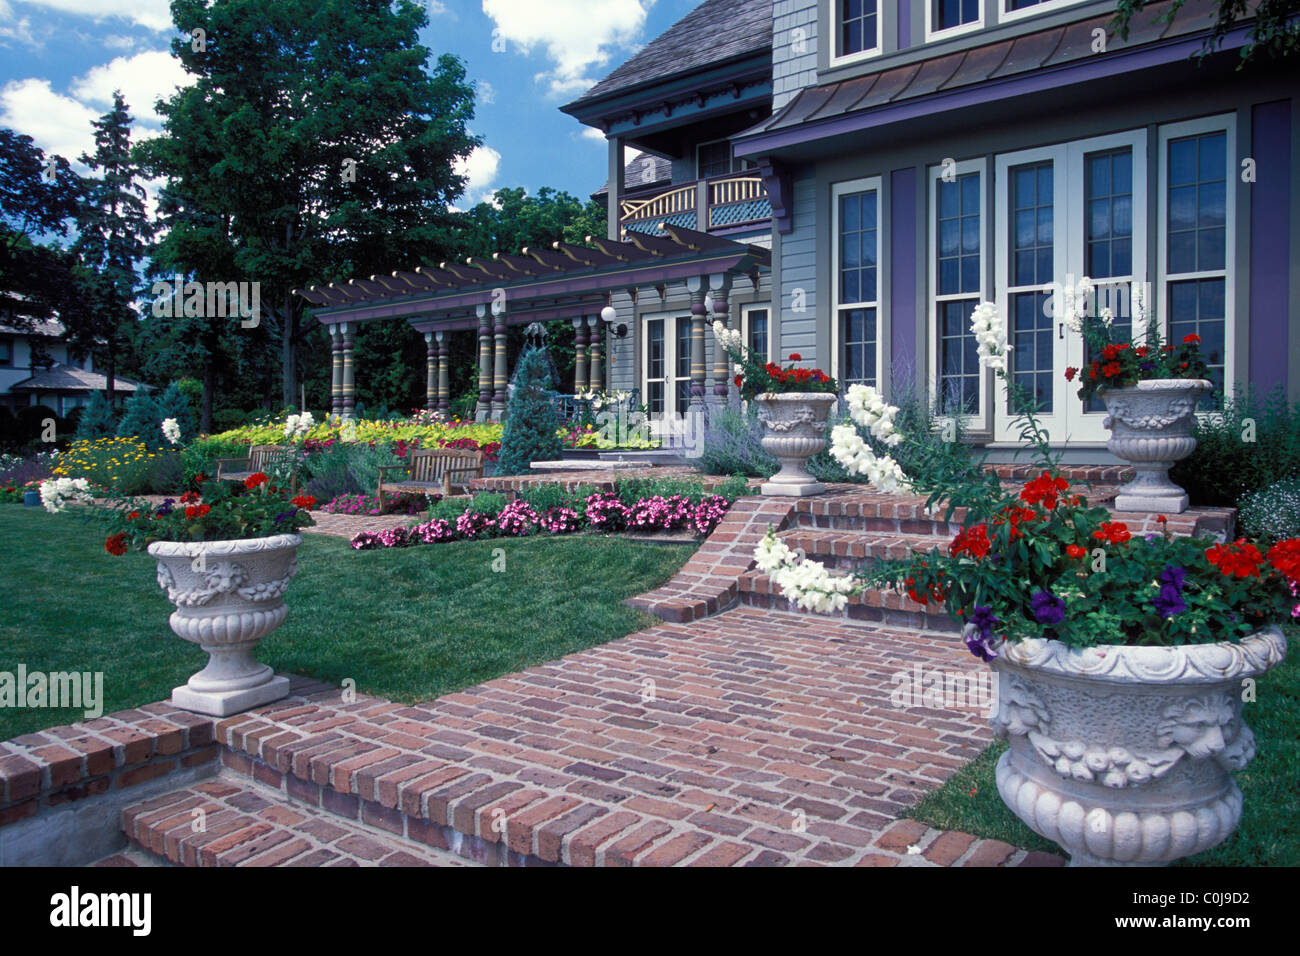 BACK GARDENS AND WALKWAY OF VICTORIAN 'PAINTED LADY' HOUSE IN MINNESOTA.  POTS OF ANNUALS IN FOREGROUND.  U.S.A. Stock Photo